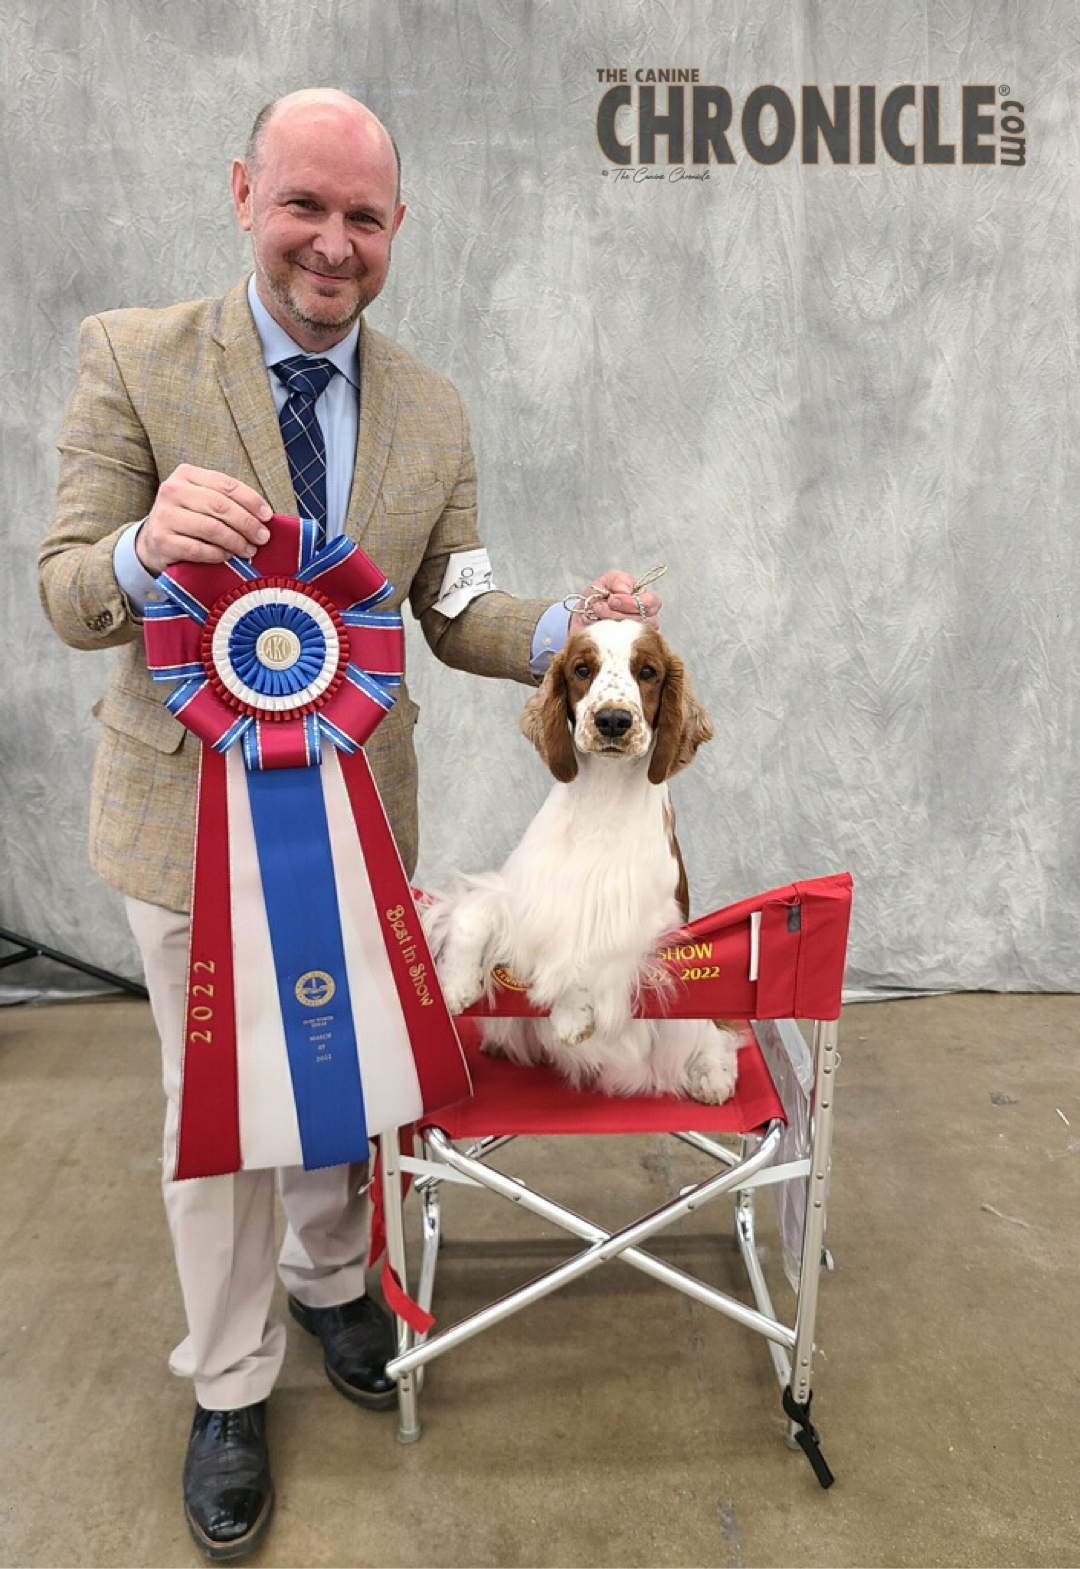 Fort Worth Kennel Club Sunday, March 27, 2022 Canine Chronicle